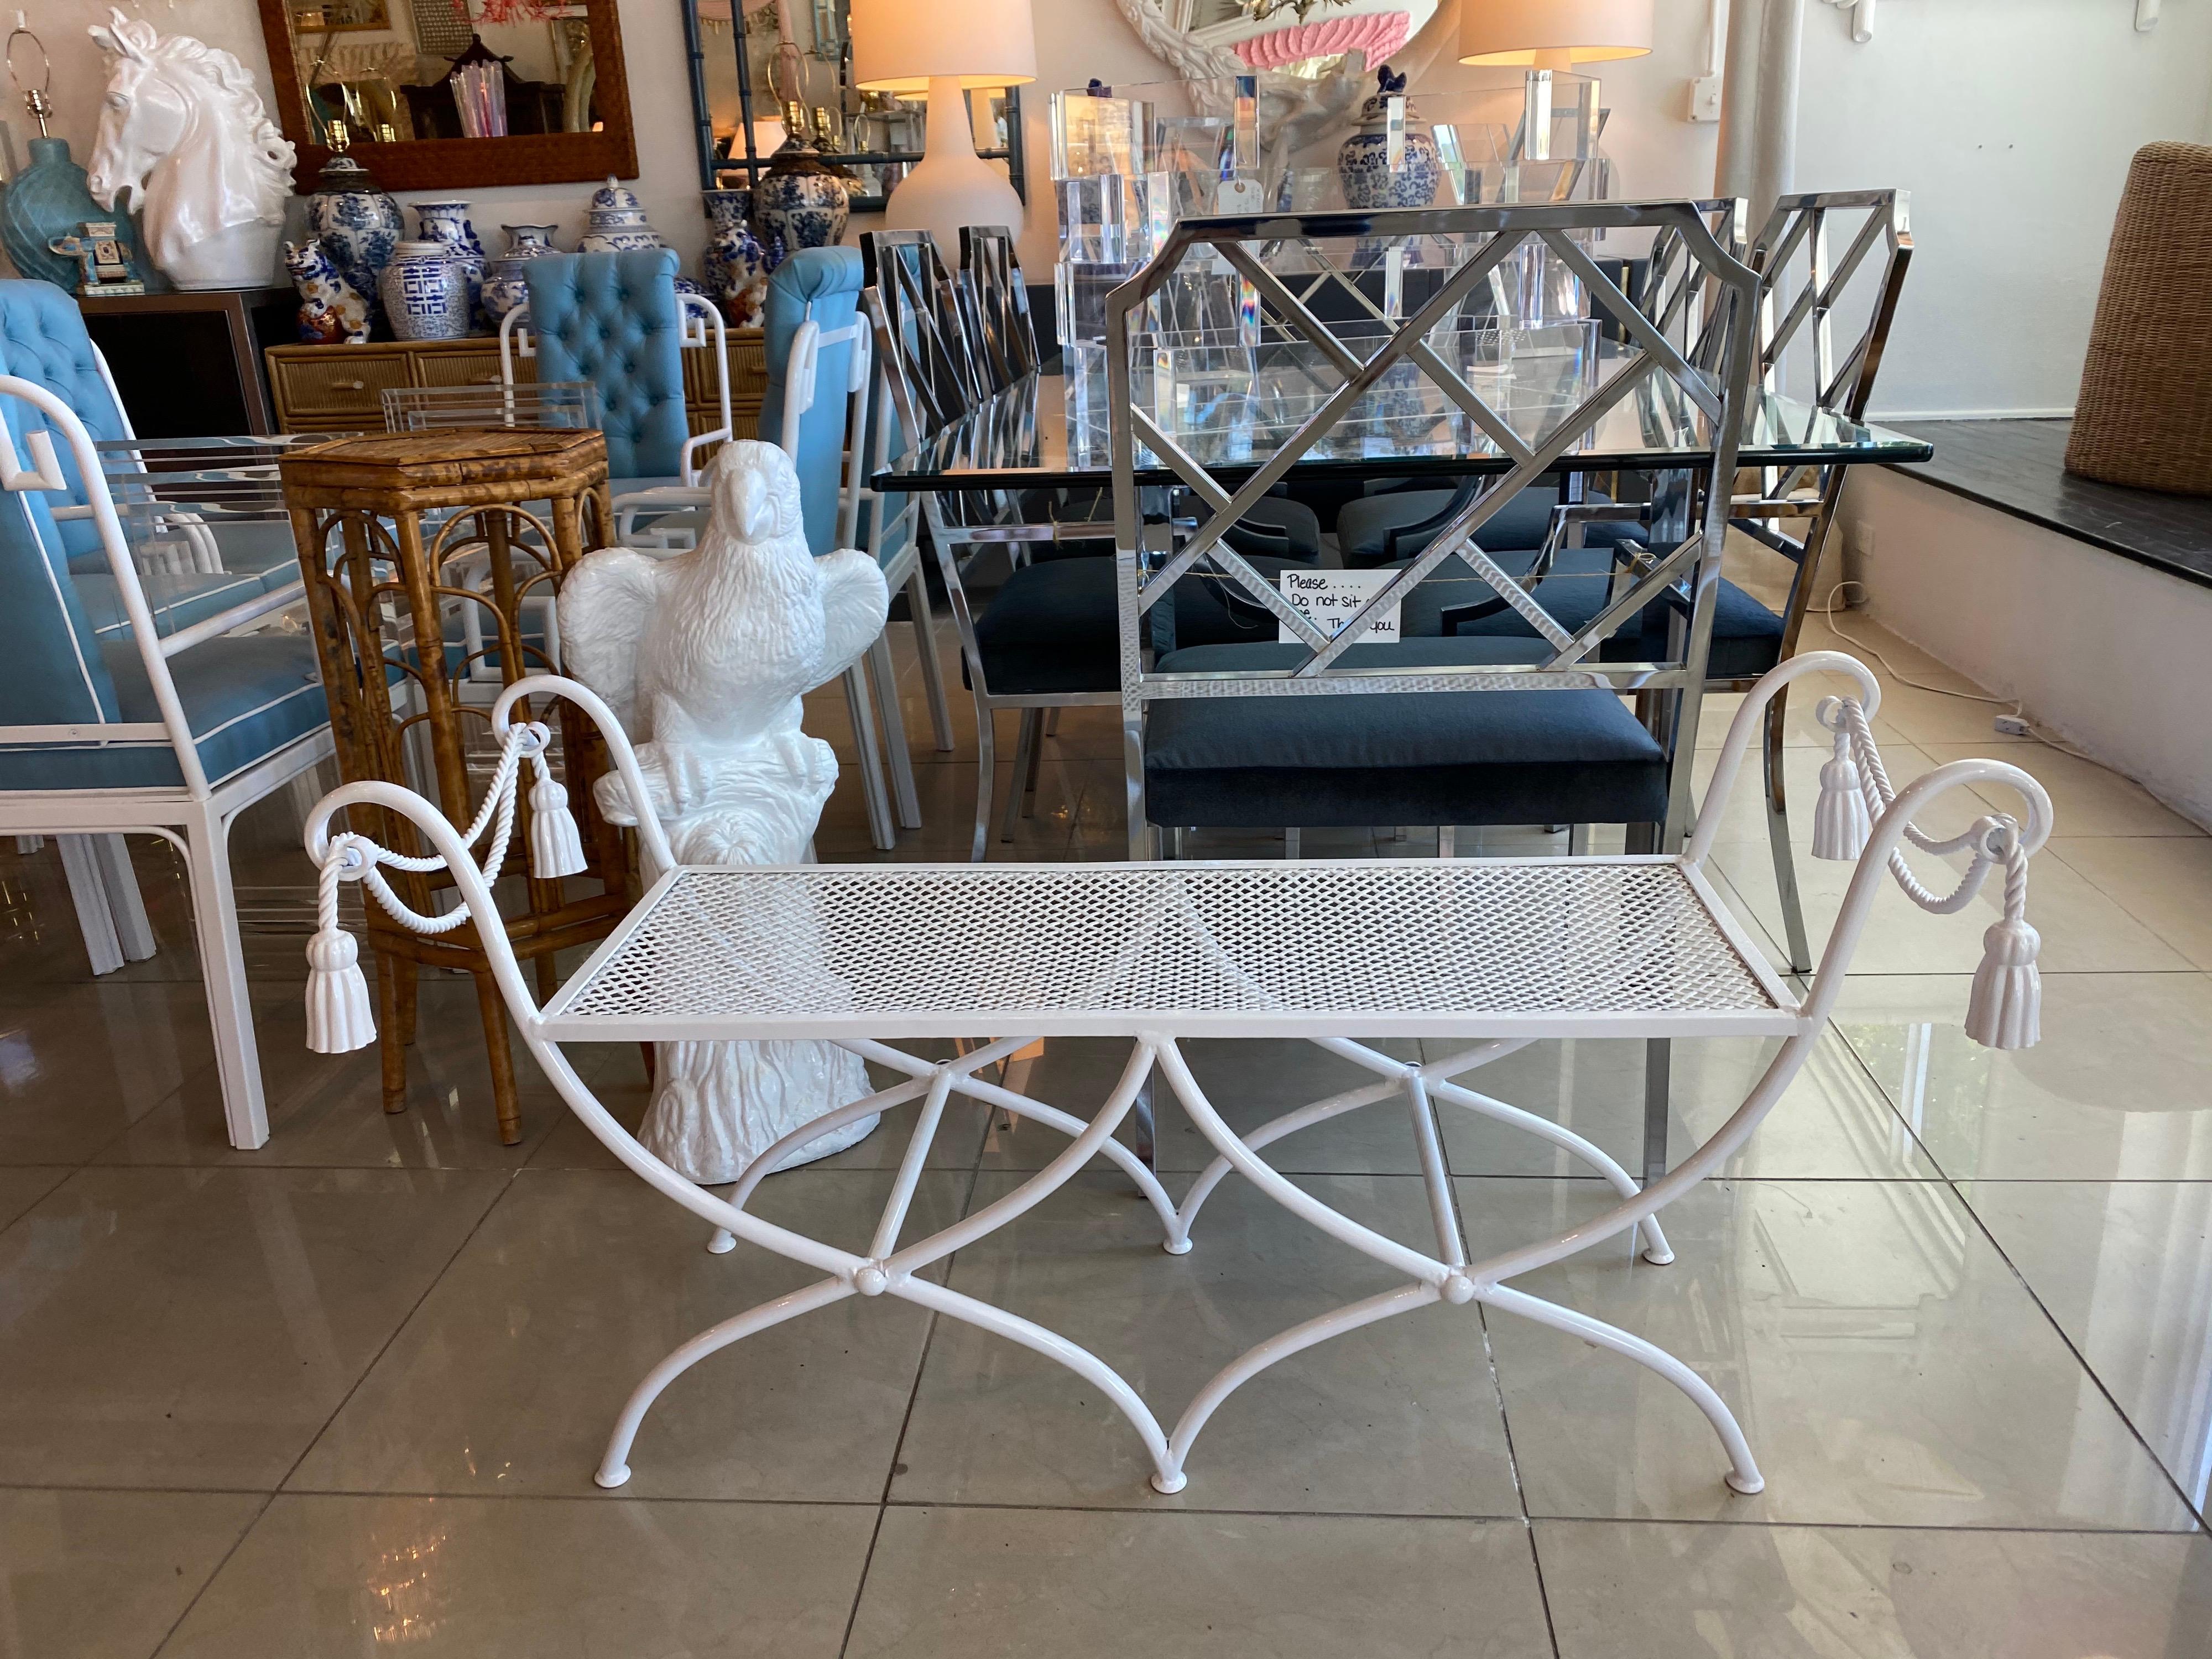 Lovely vintage metal tole Italian tassel bench. This has been newly restored with a professional powder coat white finish. This can be used indoors or outdoors.